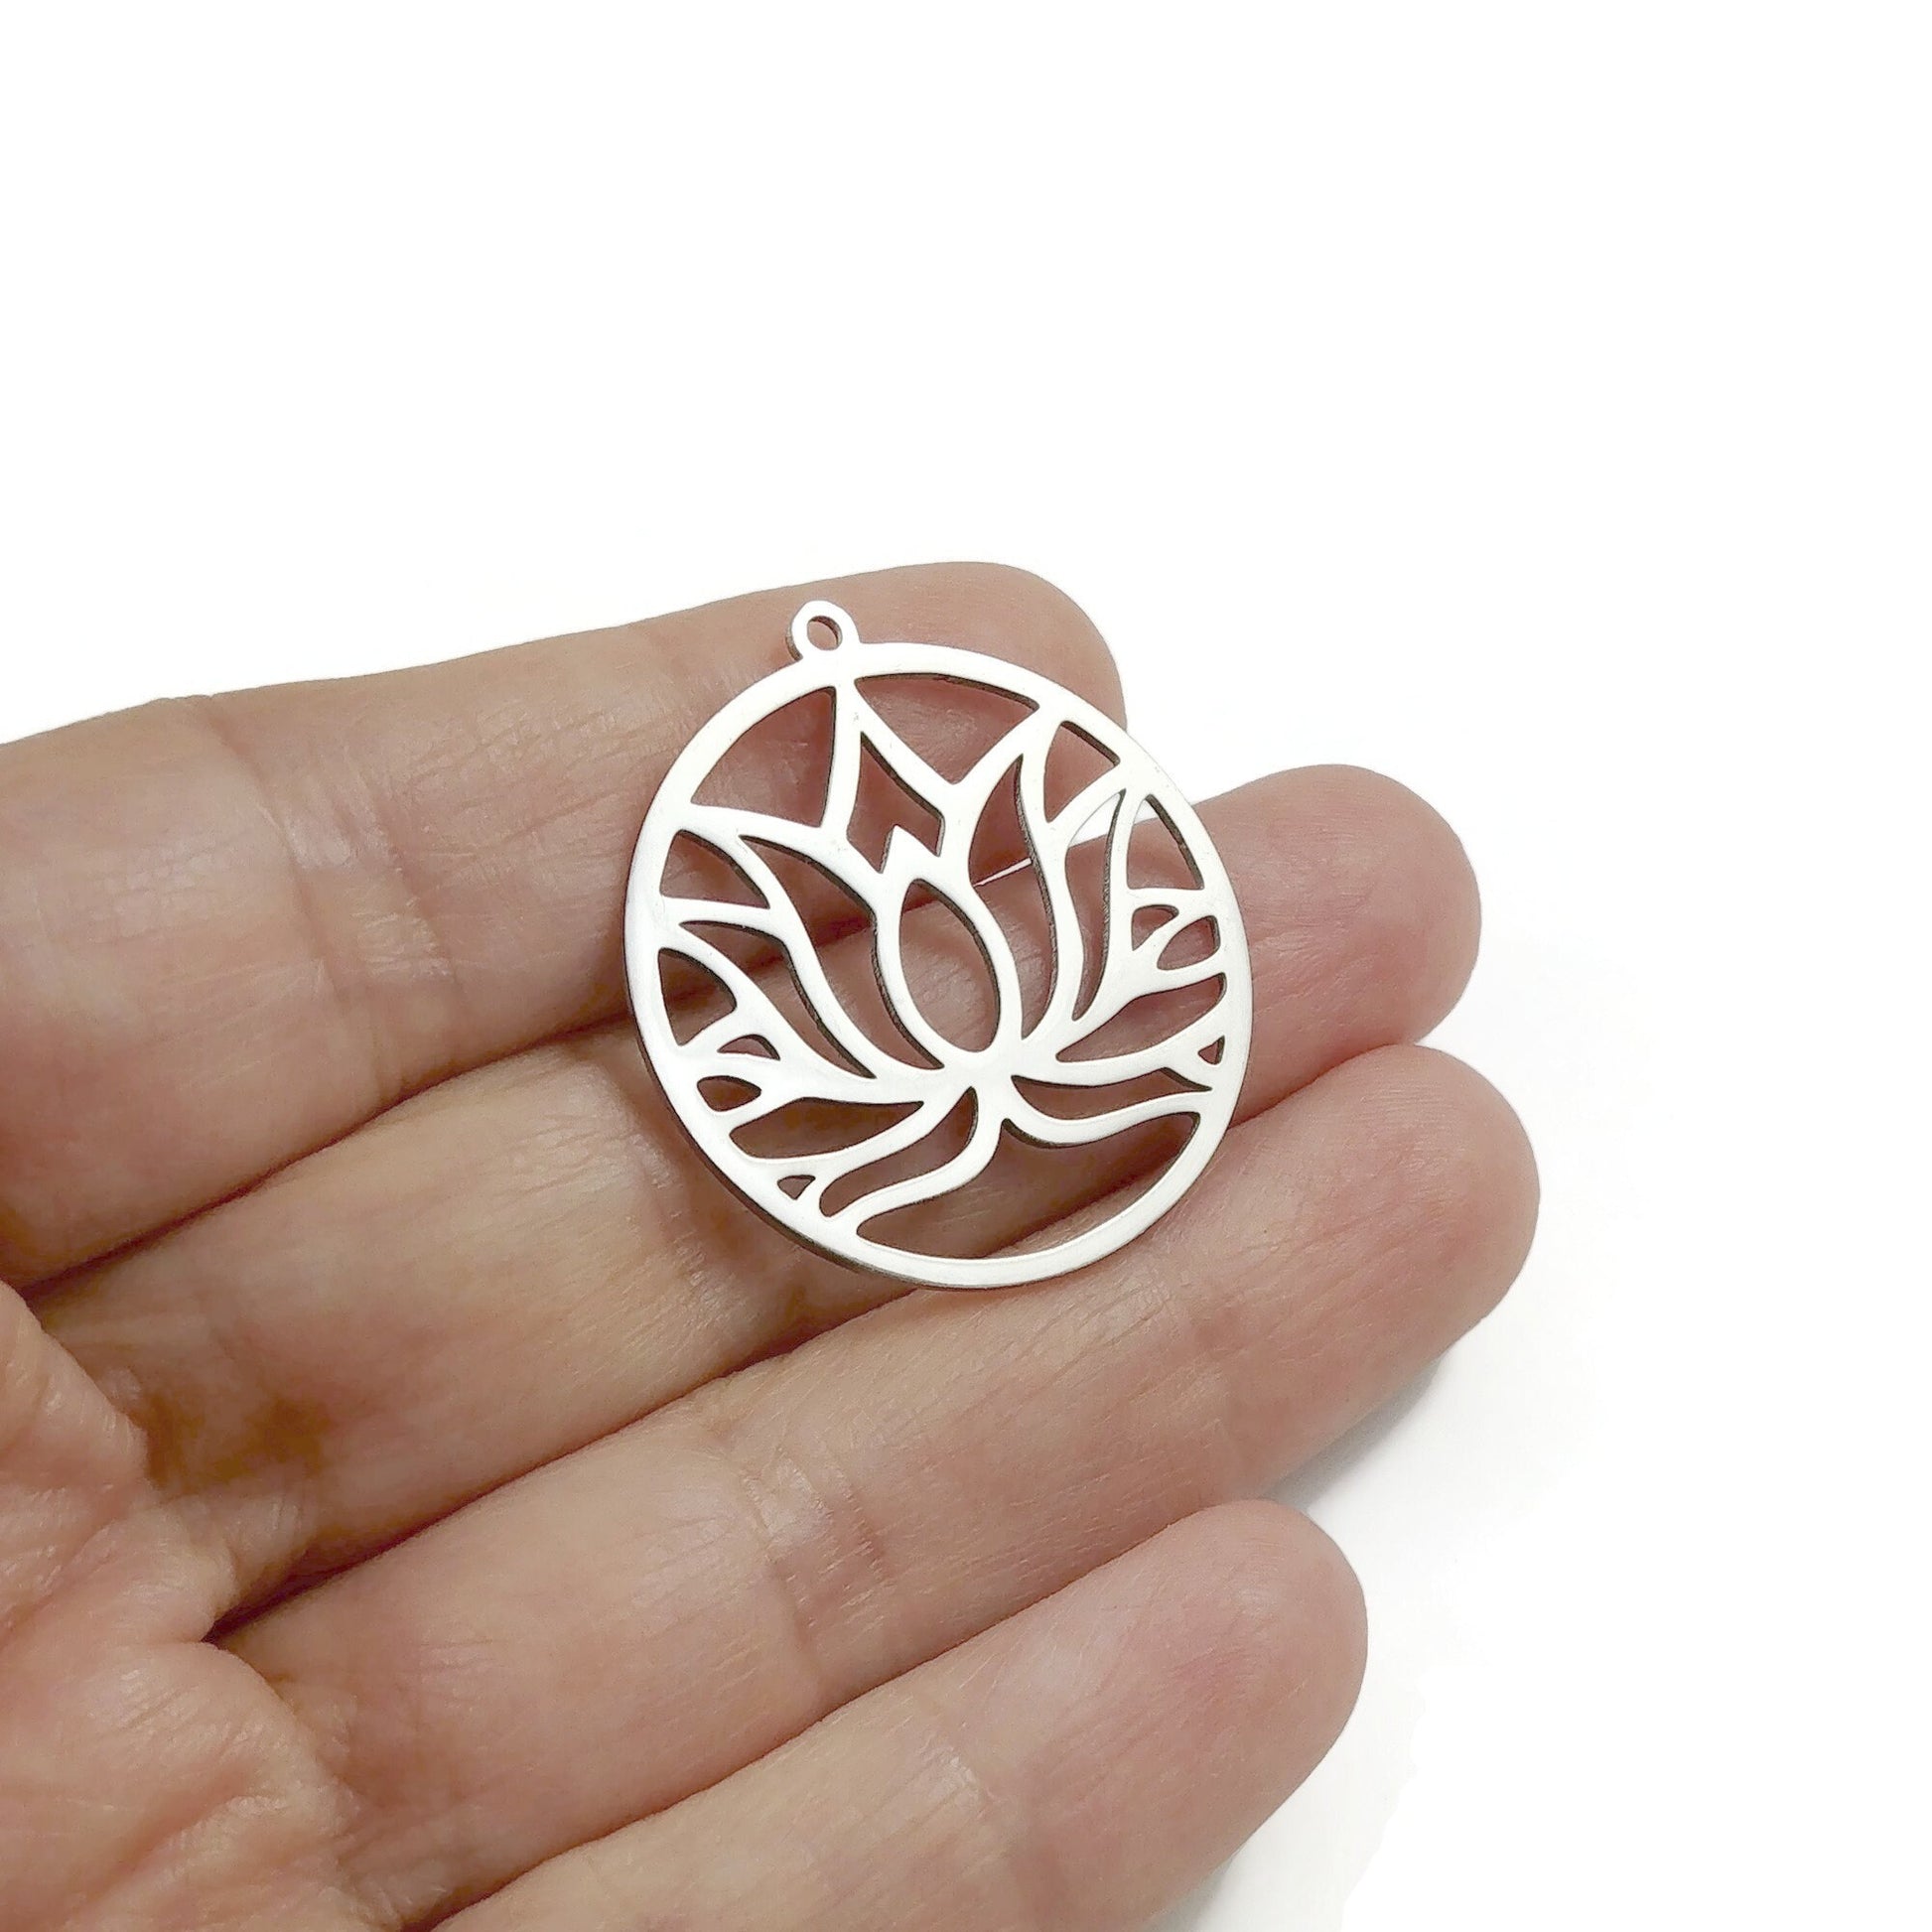 Lotus stainless steel pendant, Hypoallergenic DIY necklace supplies, Zen flower charm for jewelry making